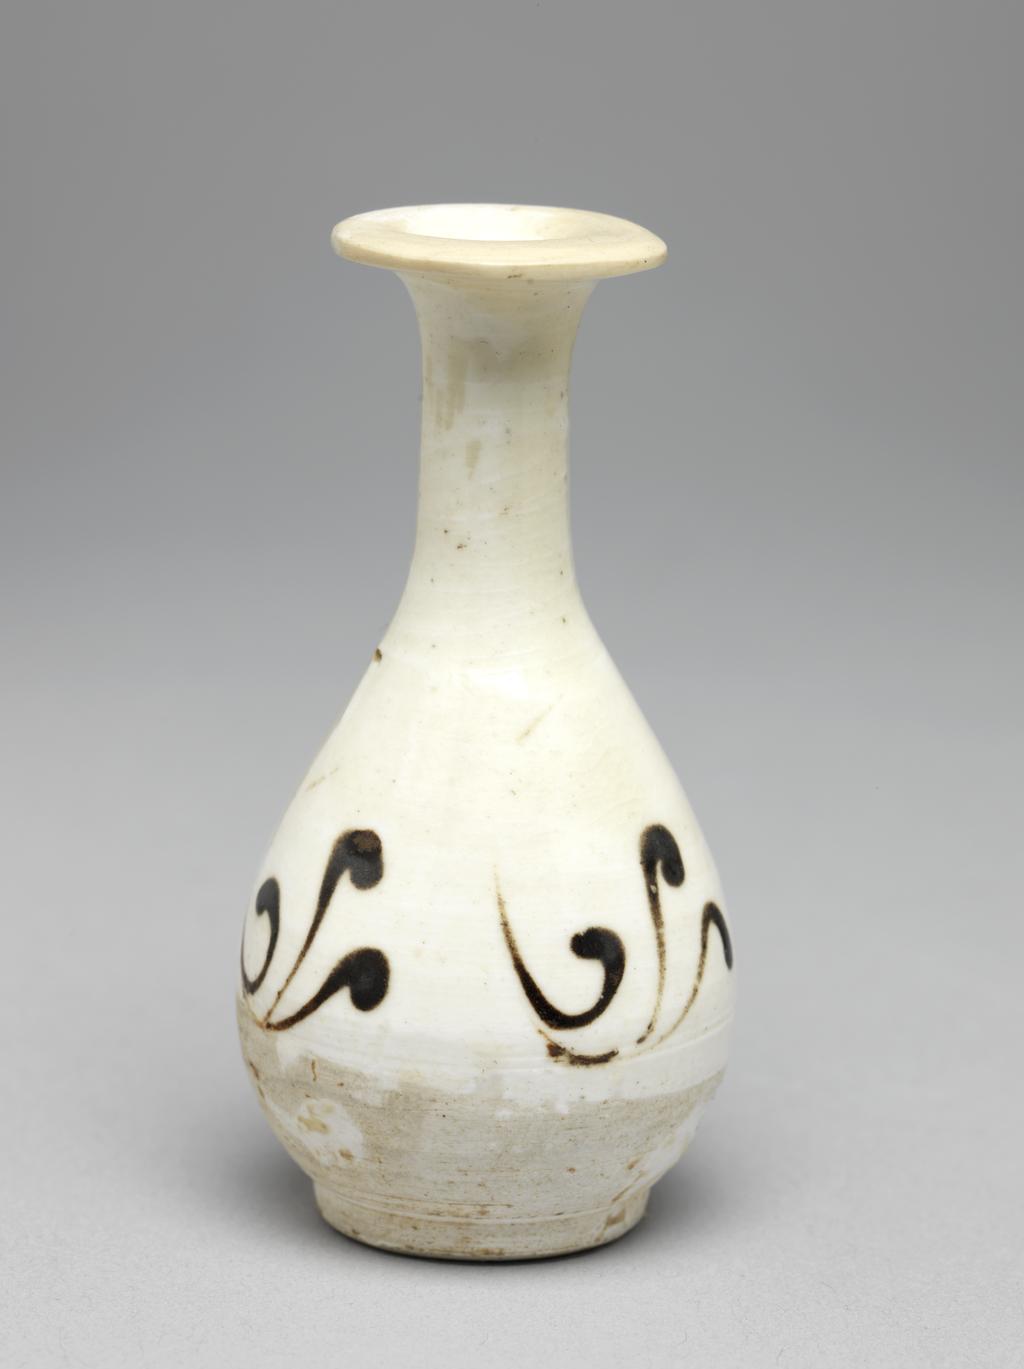 An image of Miniature vase. Cizhou ware. Piriform with a long slender neck and wide flat rim, standing on a footring. The sides are decorated with three groups of three curved brown strokes. The lower part of the vase and base are undecorated. White stoneware, decorated in dark brown on a white slip ground, under a transparent colourless glaze, height 7.2 cm, 1000-1127. Northern Song (960-1127). Chinese. Acquisition Credit: Lent to the museum by Helen H. L. Whittow (nee Malcolm).